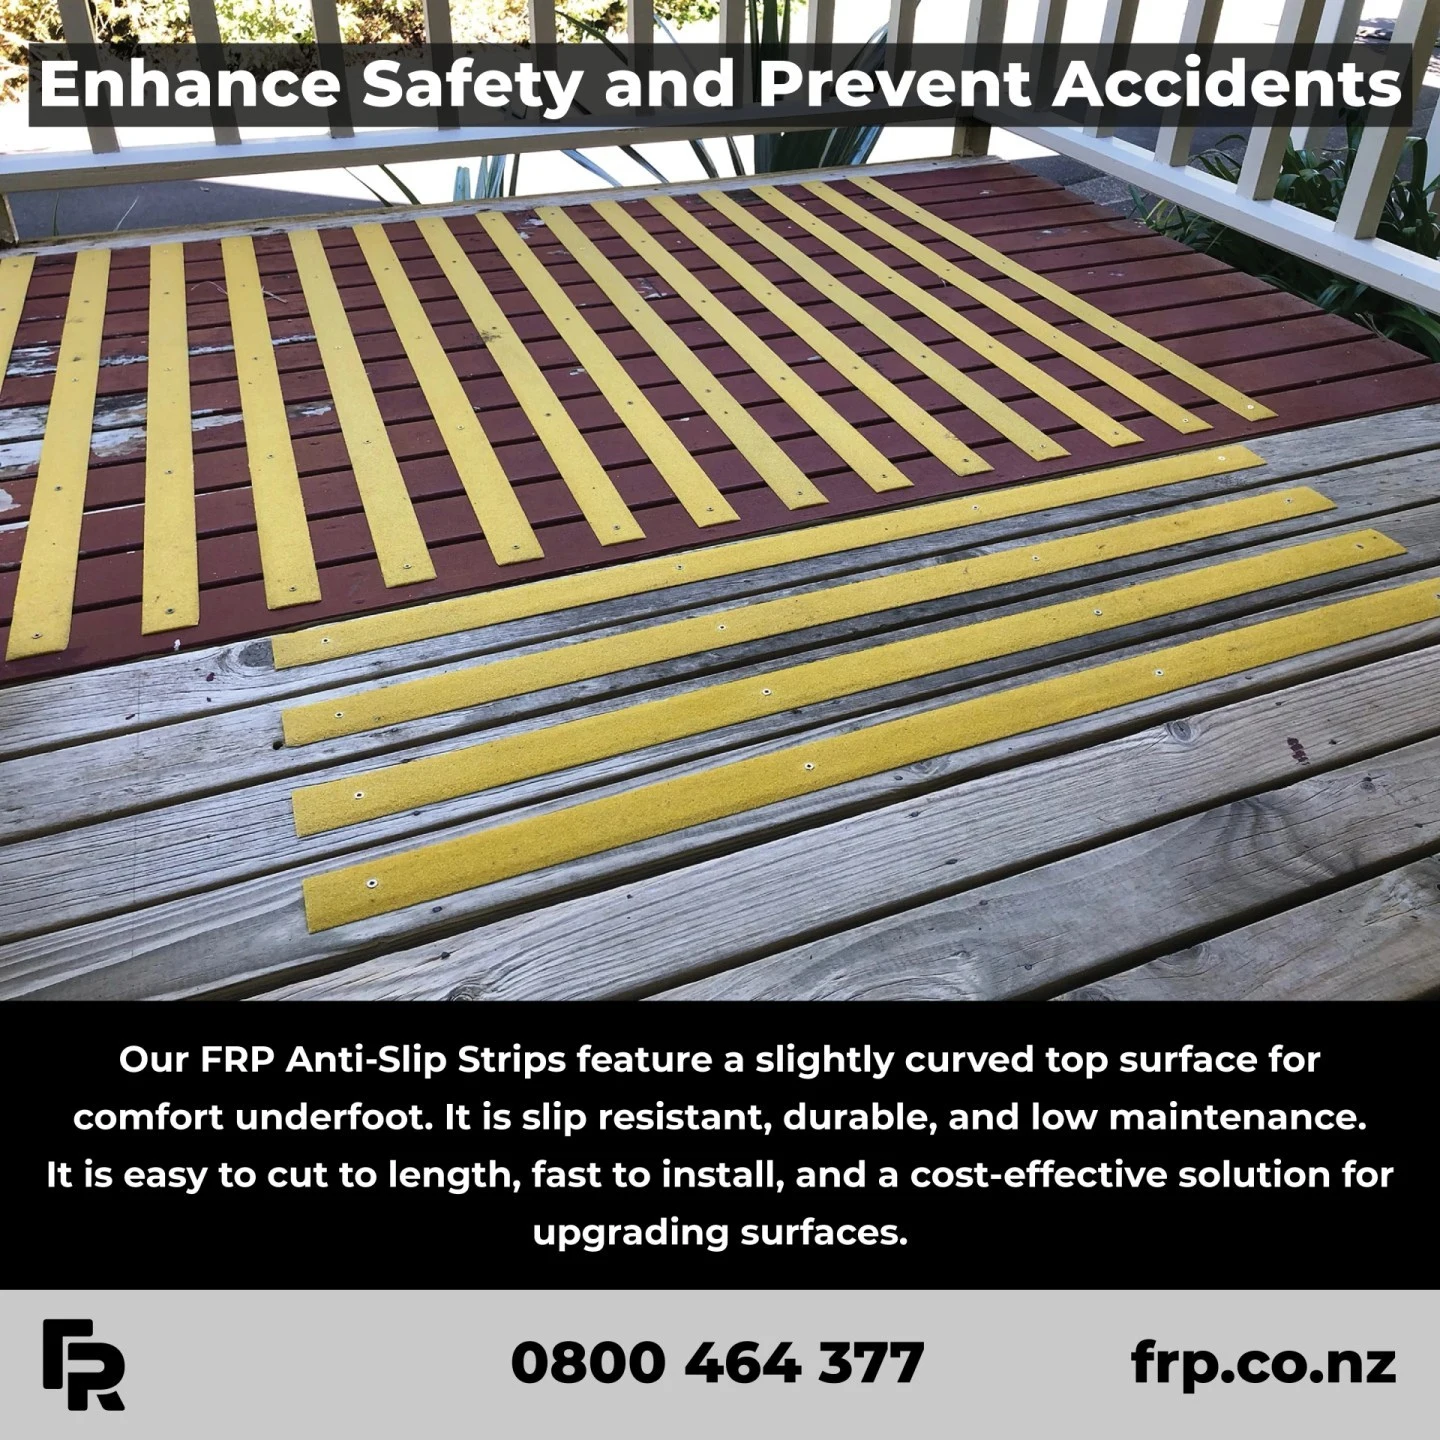 Talk to us today for winter anti-slip solutions!

#frp #frpproducts #antislip #nonslip #walkways #safety #residential #commercial #industrial #civil #nzarchitects